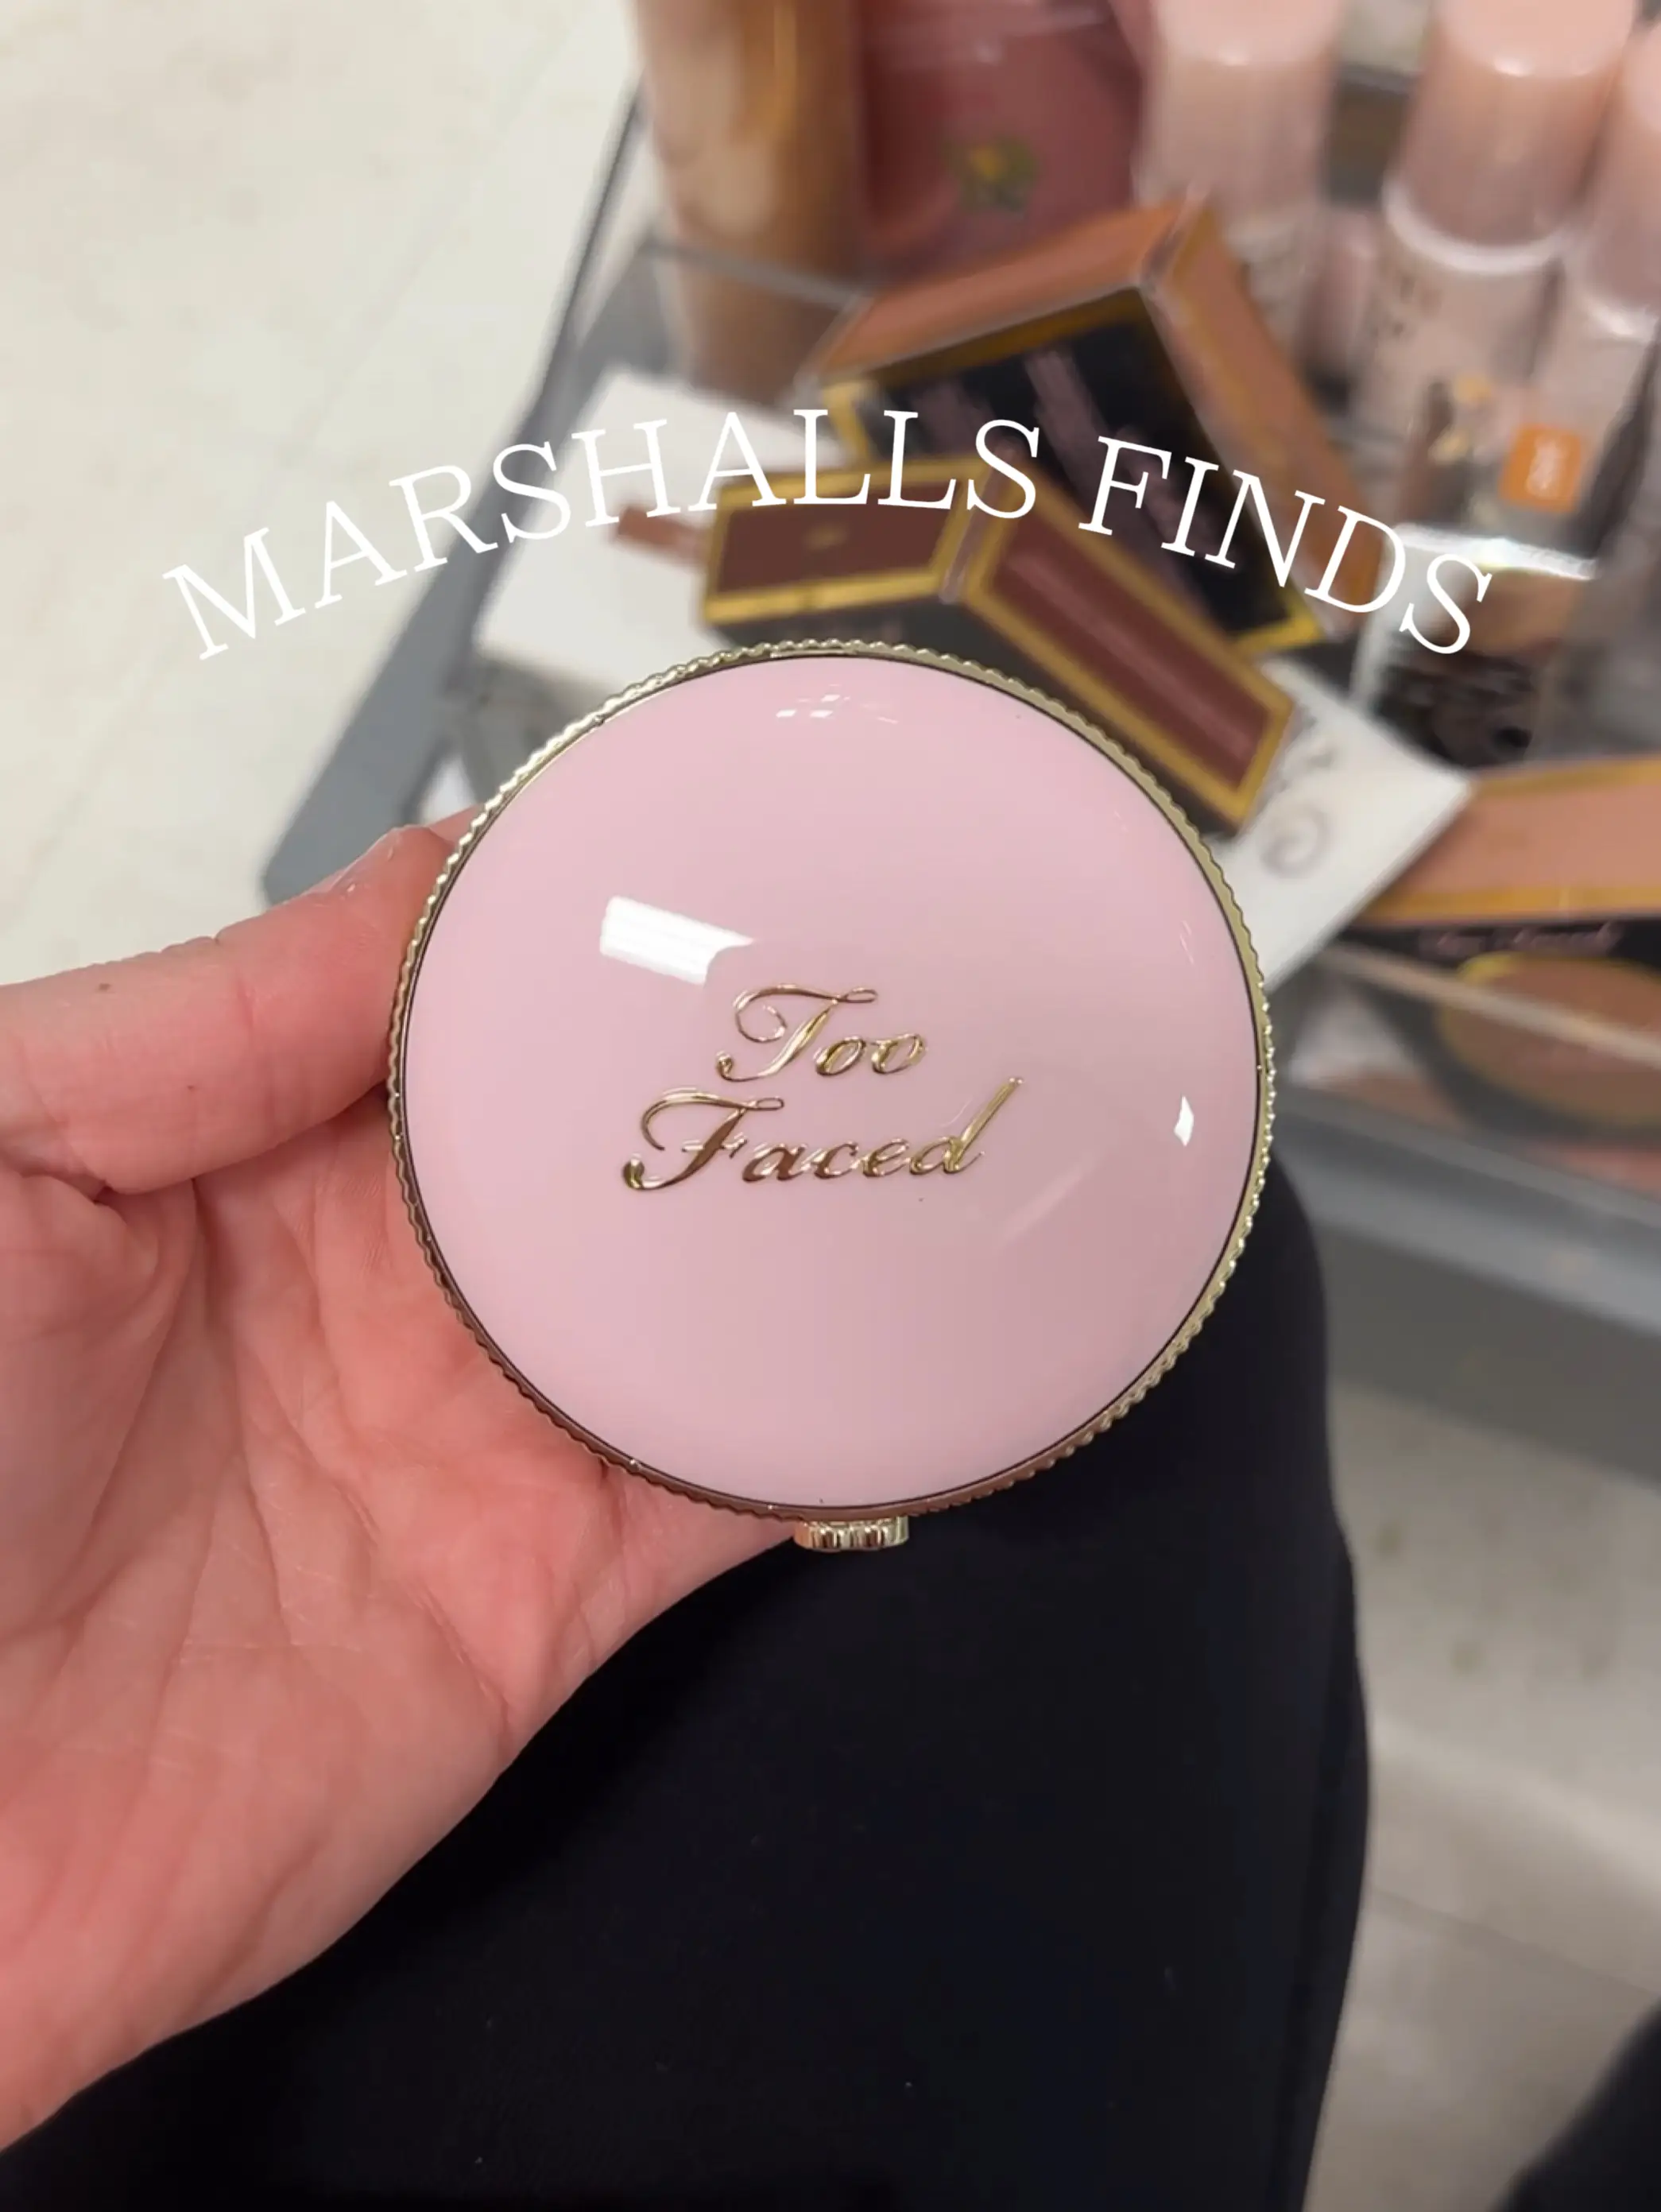 I cant believe I actually found them at Marshalls! #marshalls